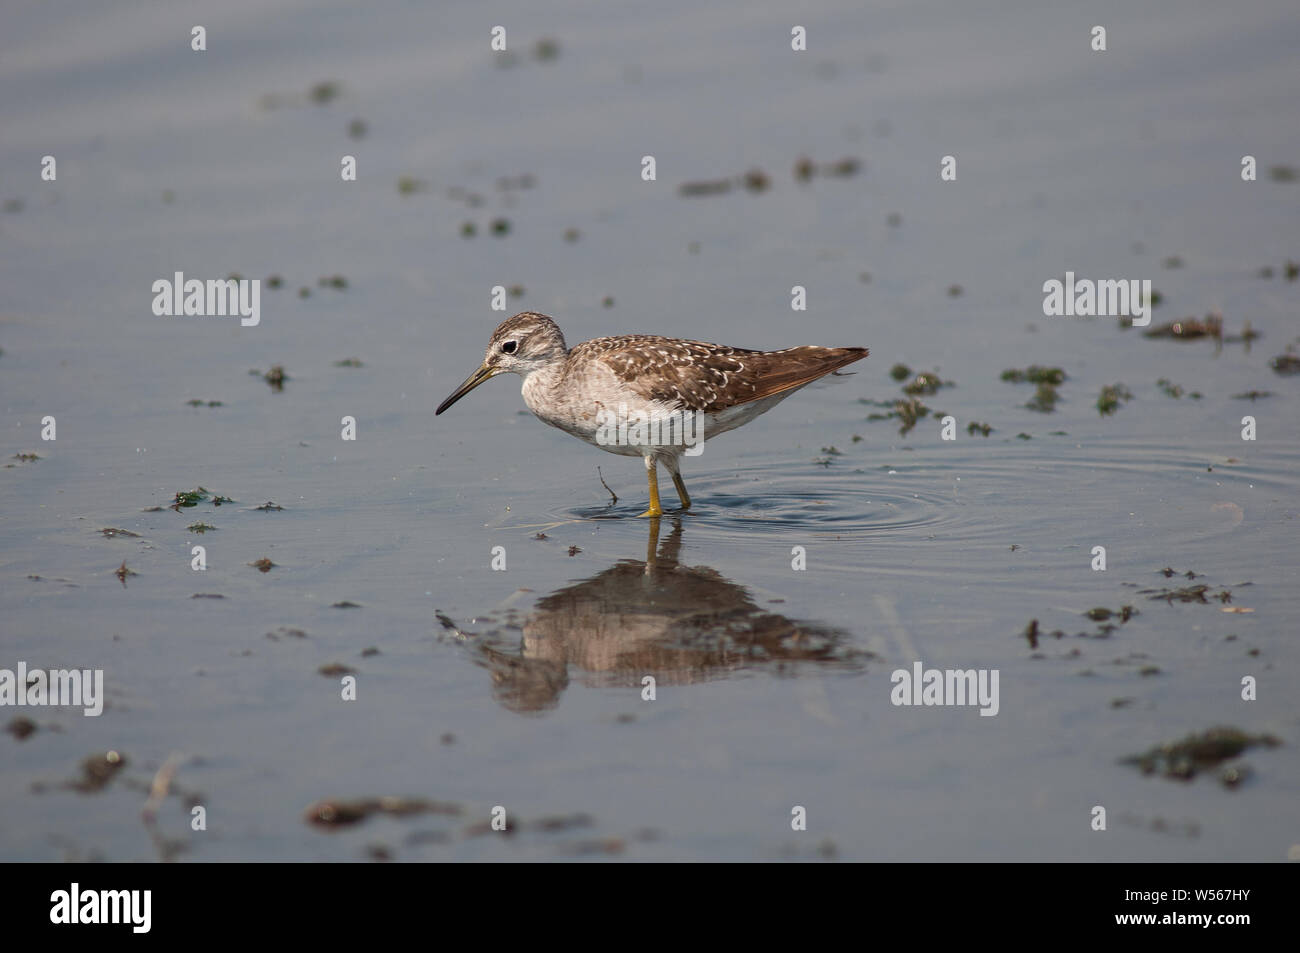 Wood Sandpiper Tringa glareola. Photographed on southward migration  foraging for small insects in shallow water on the Nile outside Khartoum, Sudan. Stock Photo